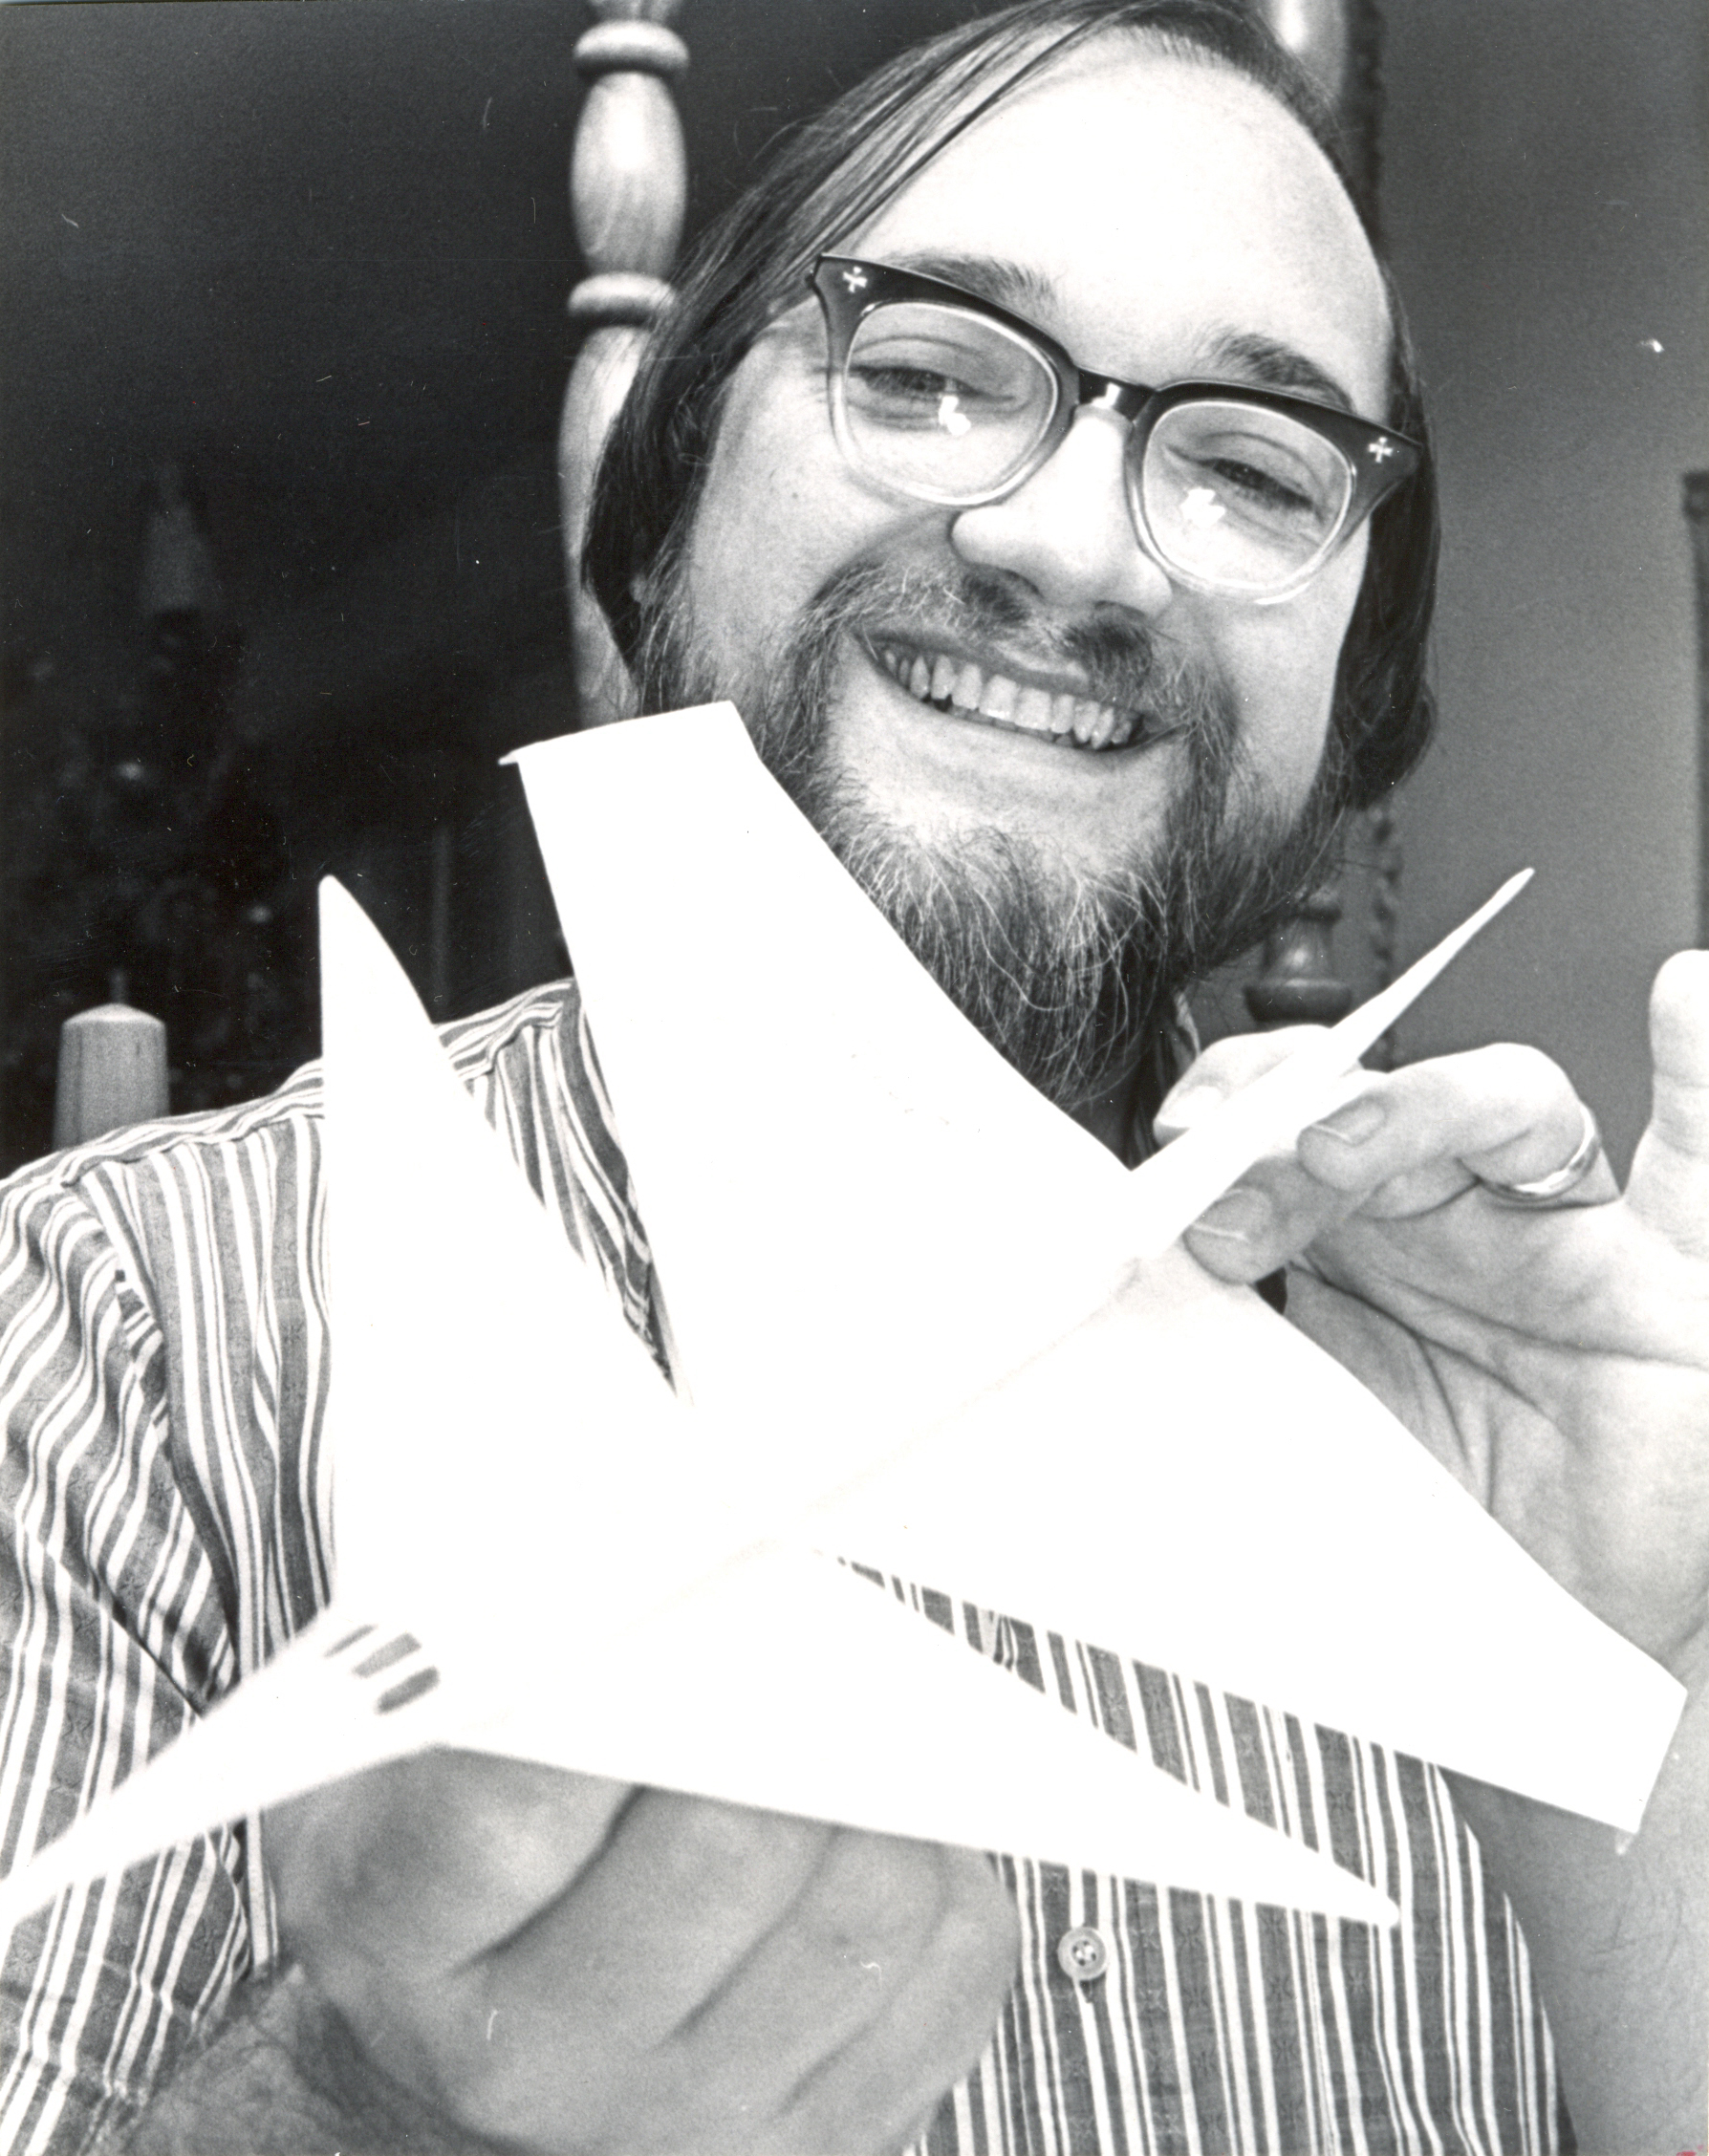 Frank H. Scott with one of the designs he plans to enter in the paper airplane contest at the Convention Center. Photo by Roberts. Dec. 1975. (Dayton Daily News Archive, DDNBW, Airplanes-paper-contests)